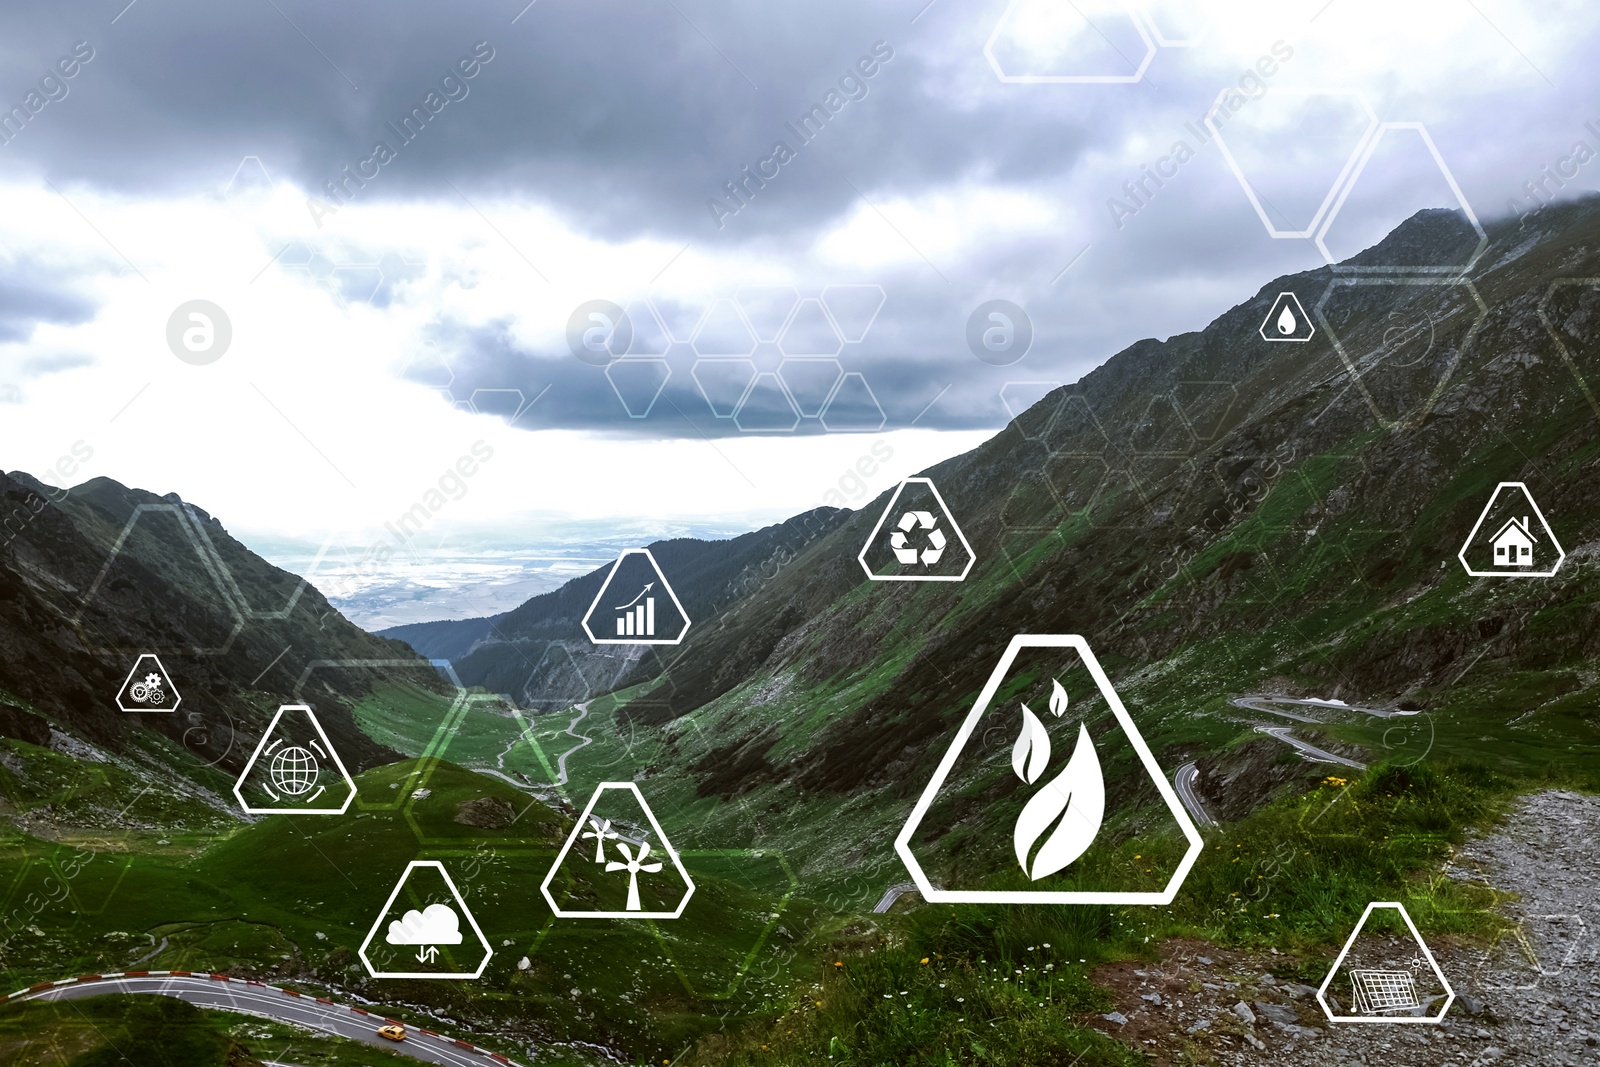 Image of Digital eco icons and beautiful mountains on cloudy day